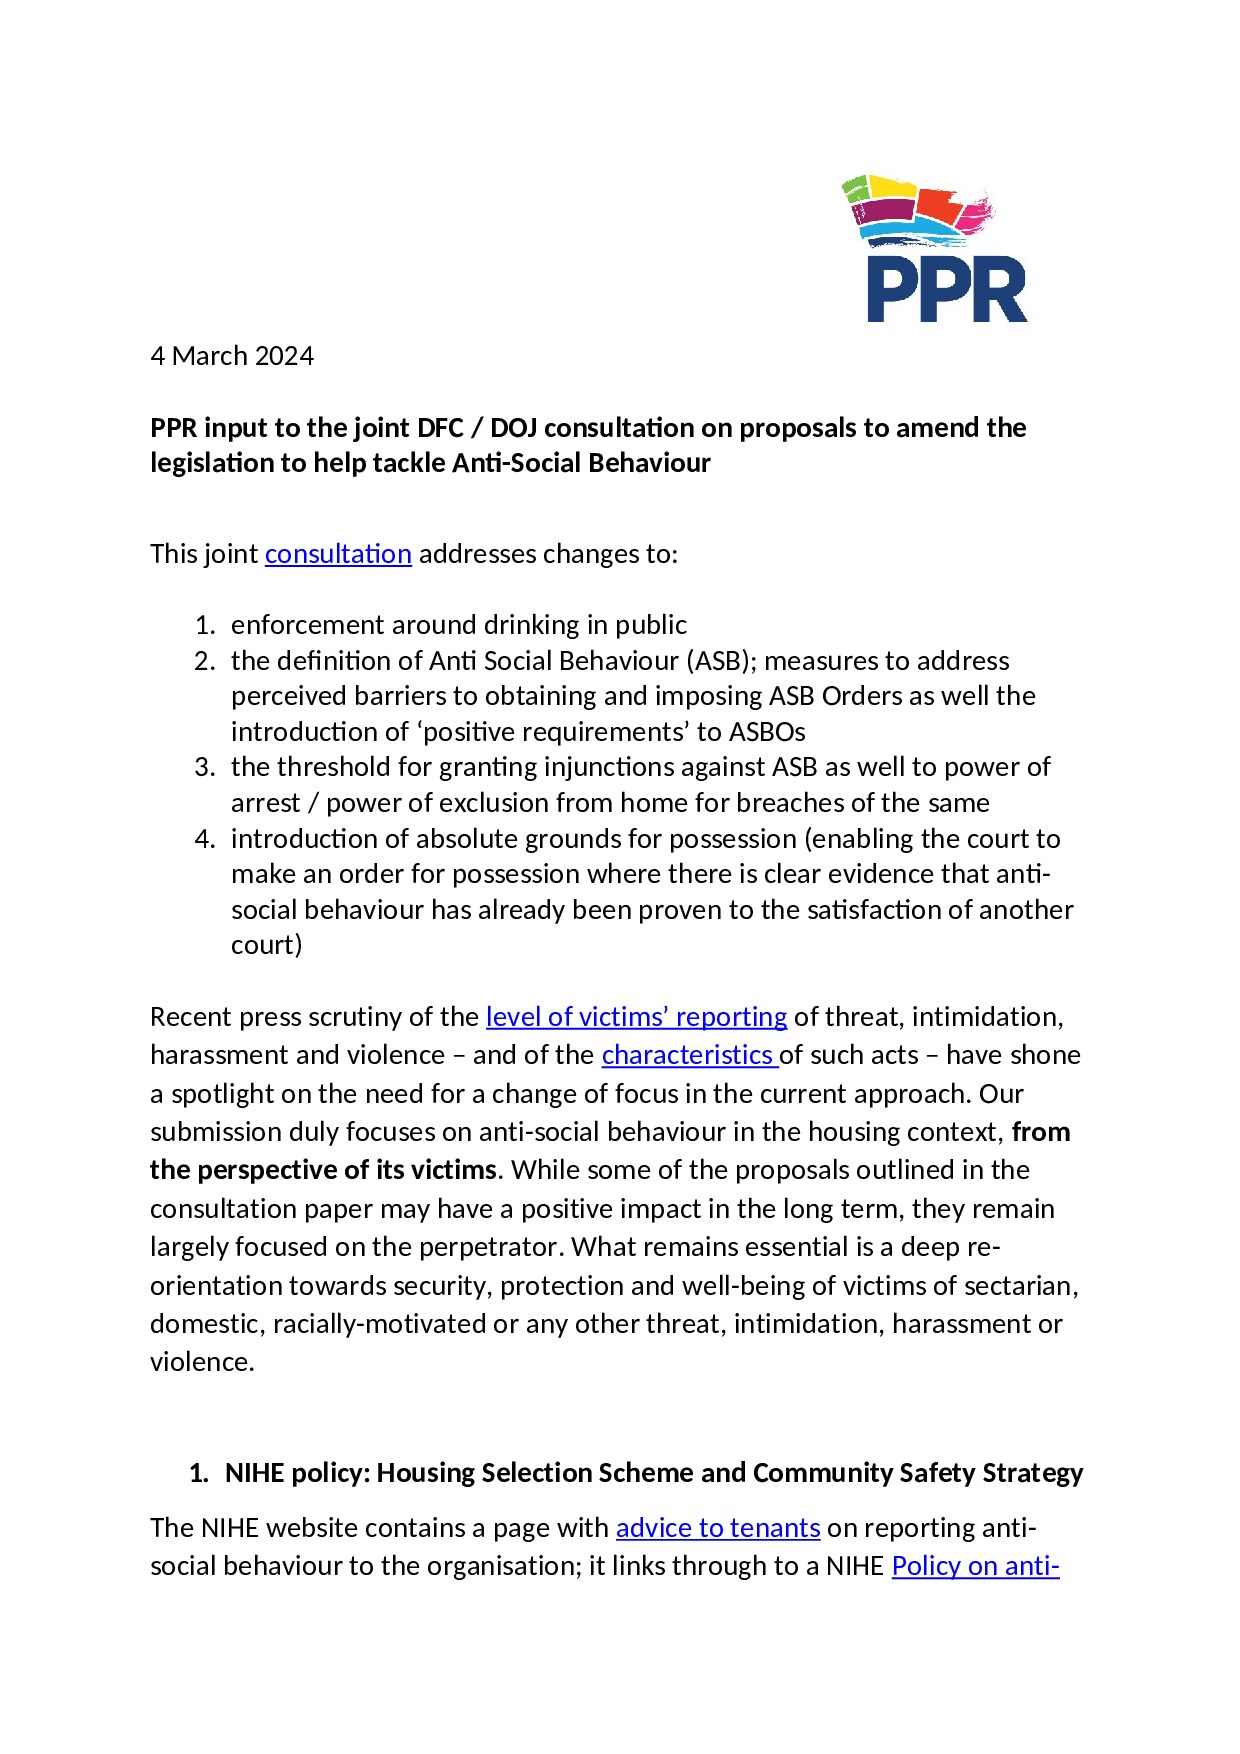 PPR input to the joint Department for Communities / Department of Justice consultation on proposals to amend the legislation to help tackle Anti-Social Behaviour